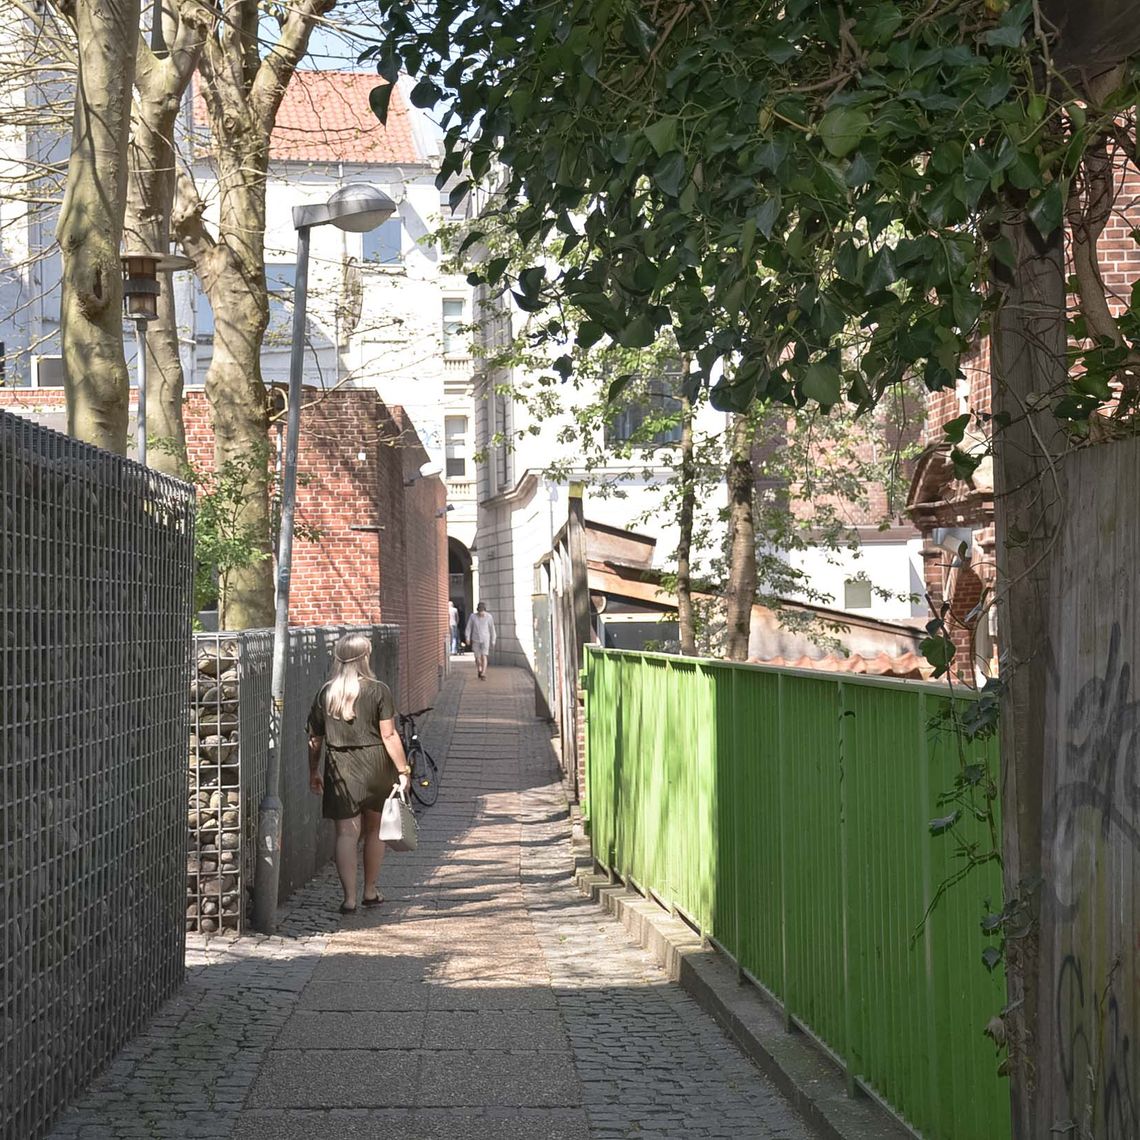 An alley with a green fence and a woman walking away from the camera